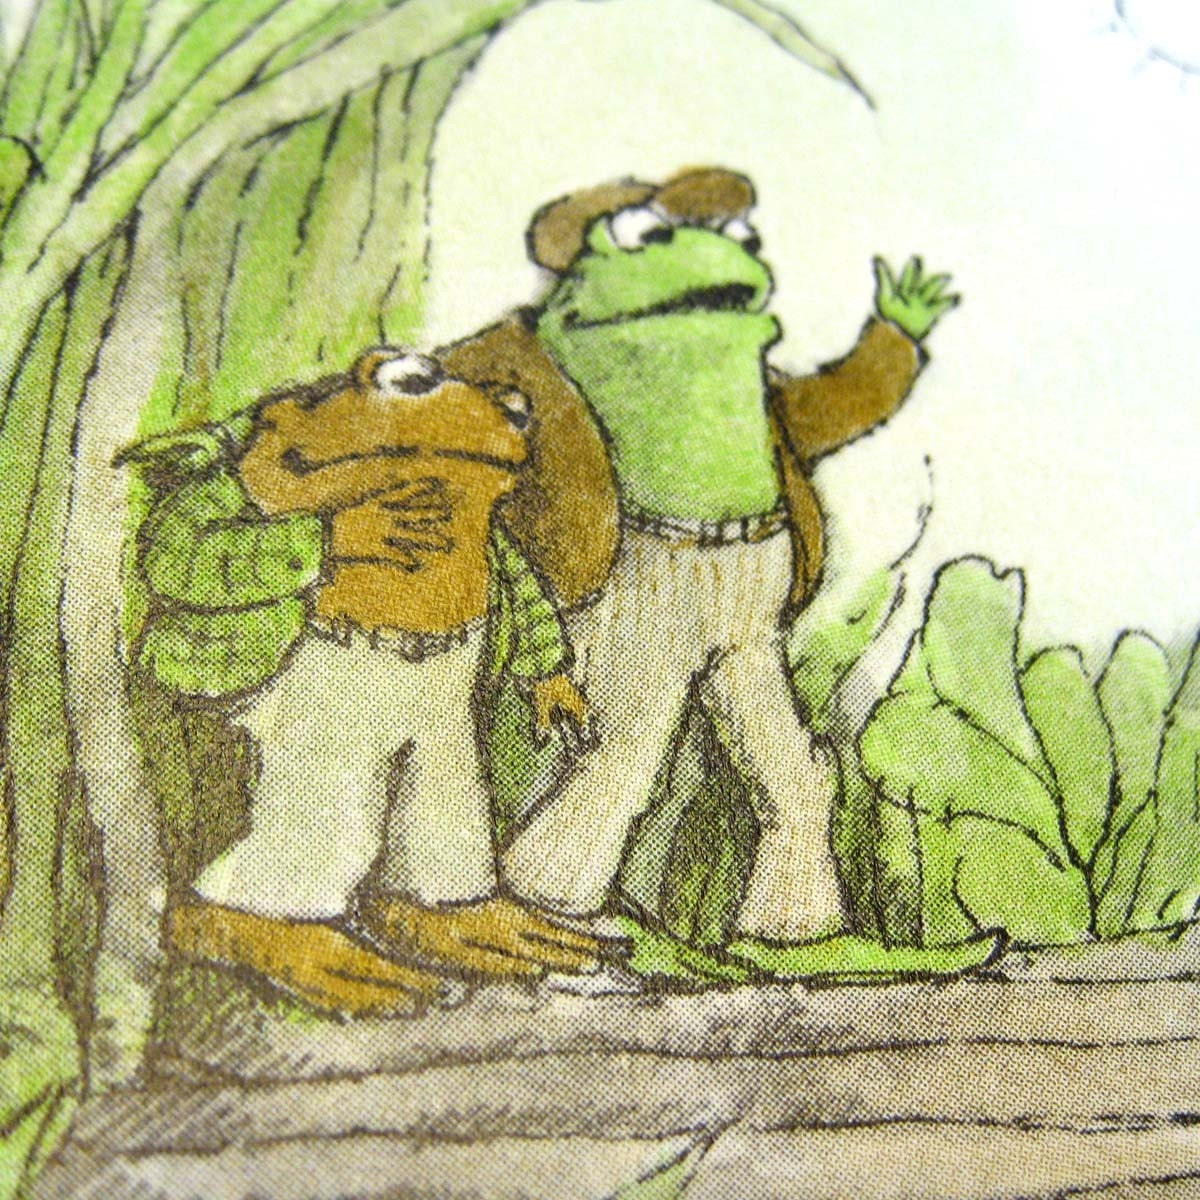 frog and toad garden story